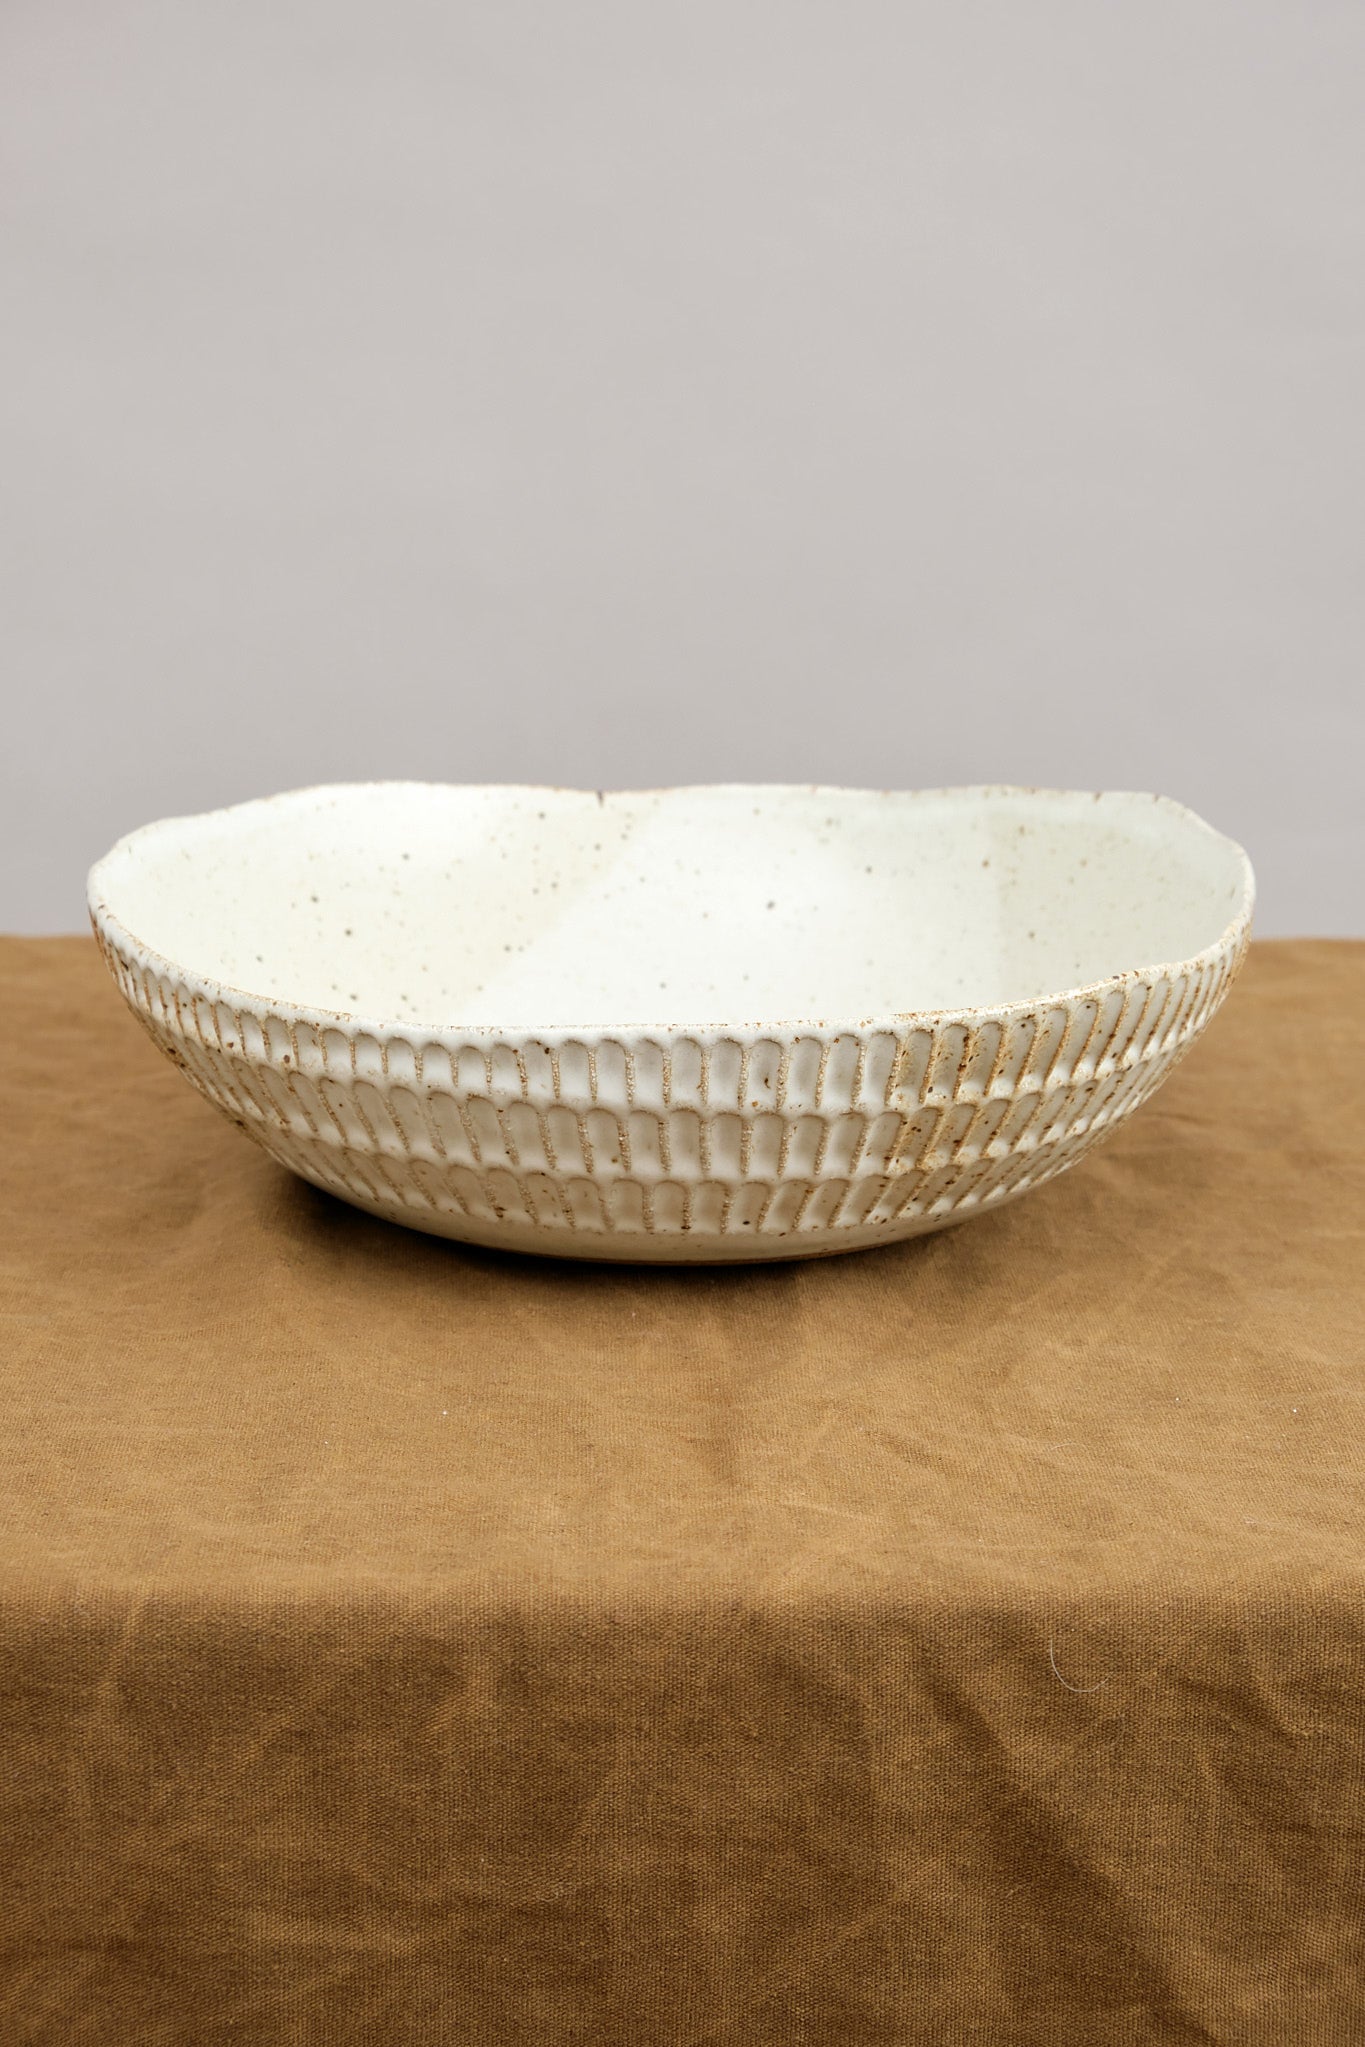 Mt. Washington Pottery Carved Eggshell Serving Bowl in Speckled White